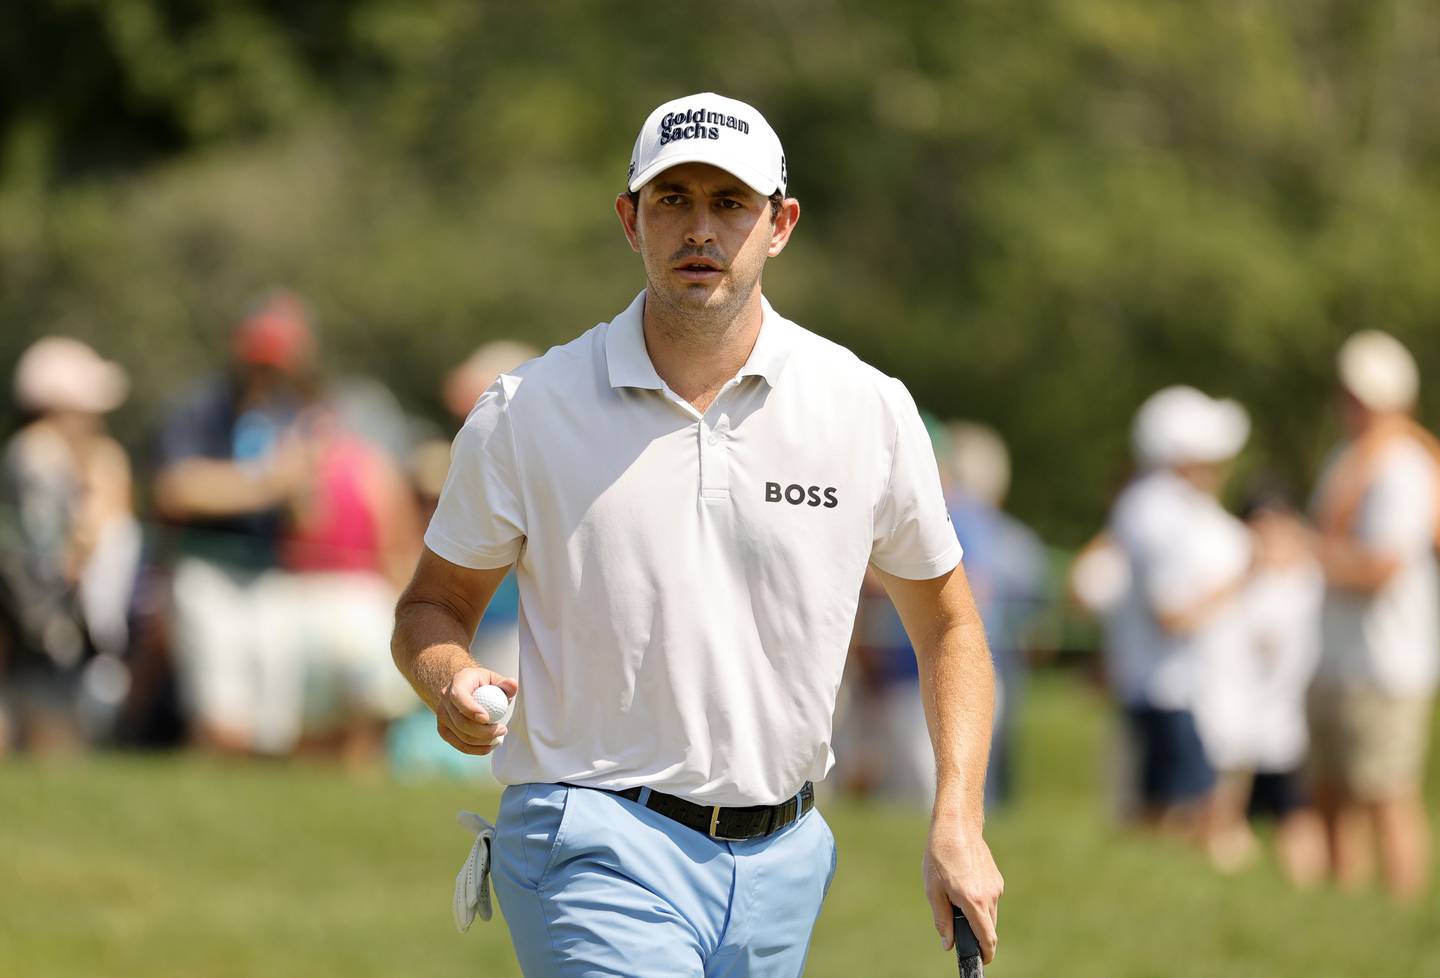 Patrick Cantlay said he has no immediate plans to join LIV Golf. AFP